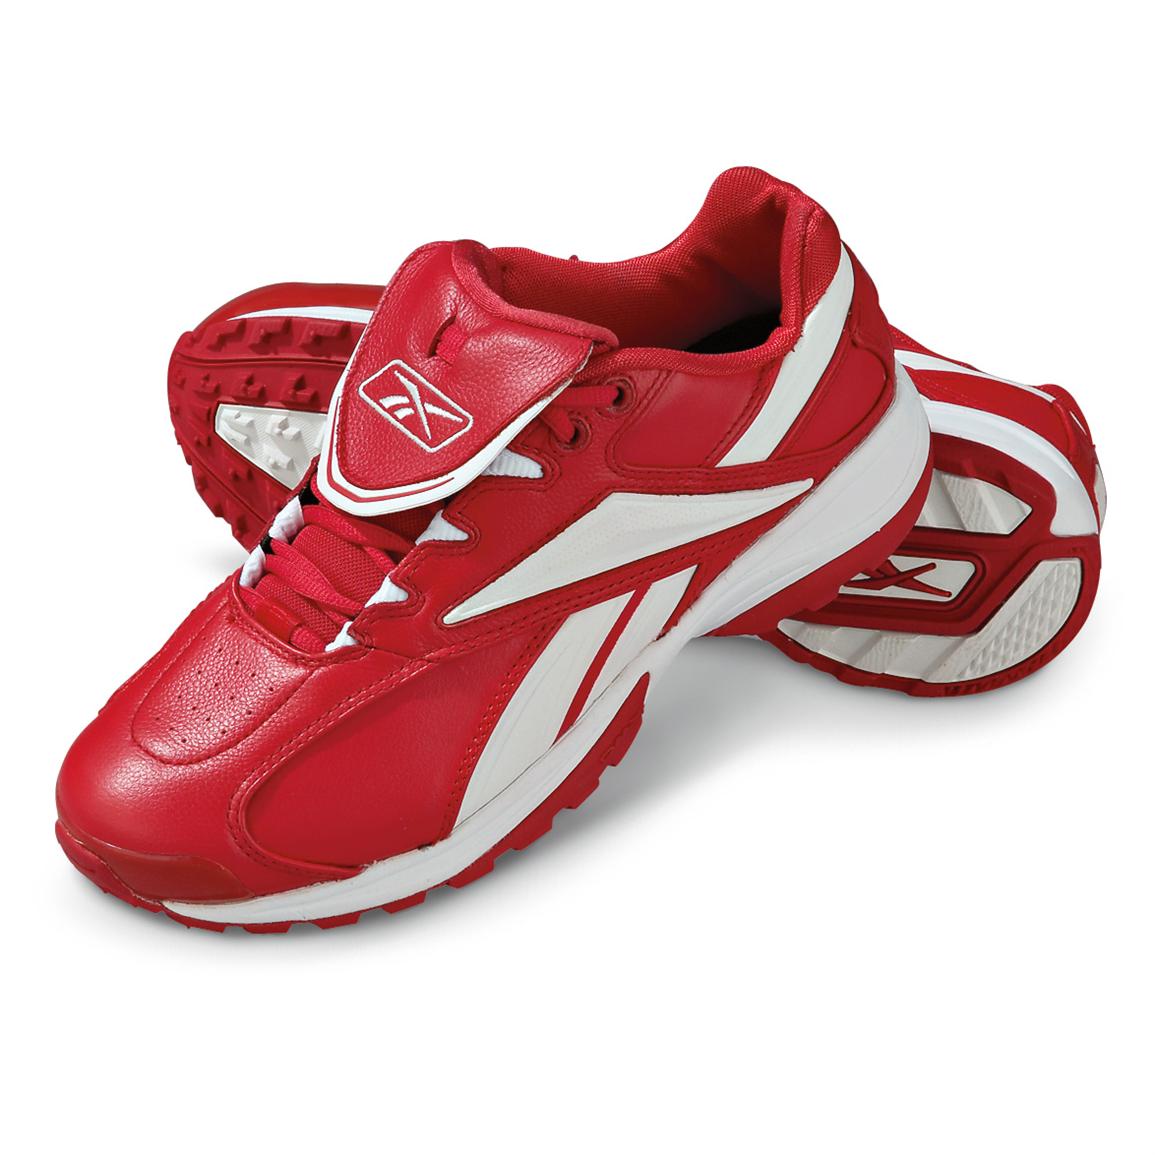 Men's Reebok® Vero FL Turf Trainer Low Athletic Shoes, Red / White ...